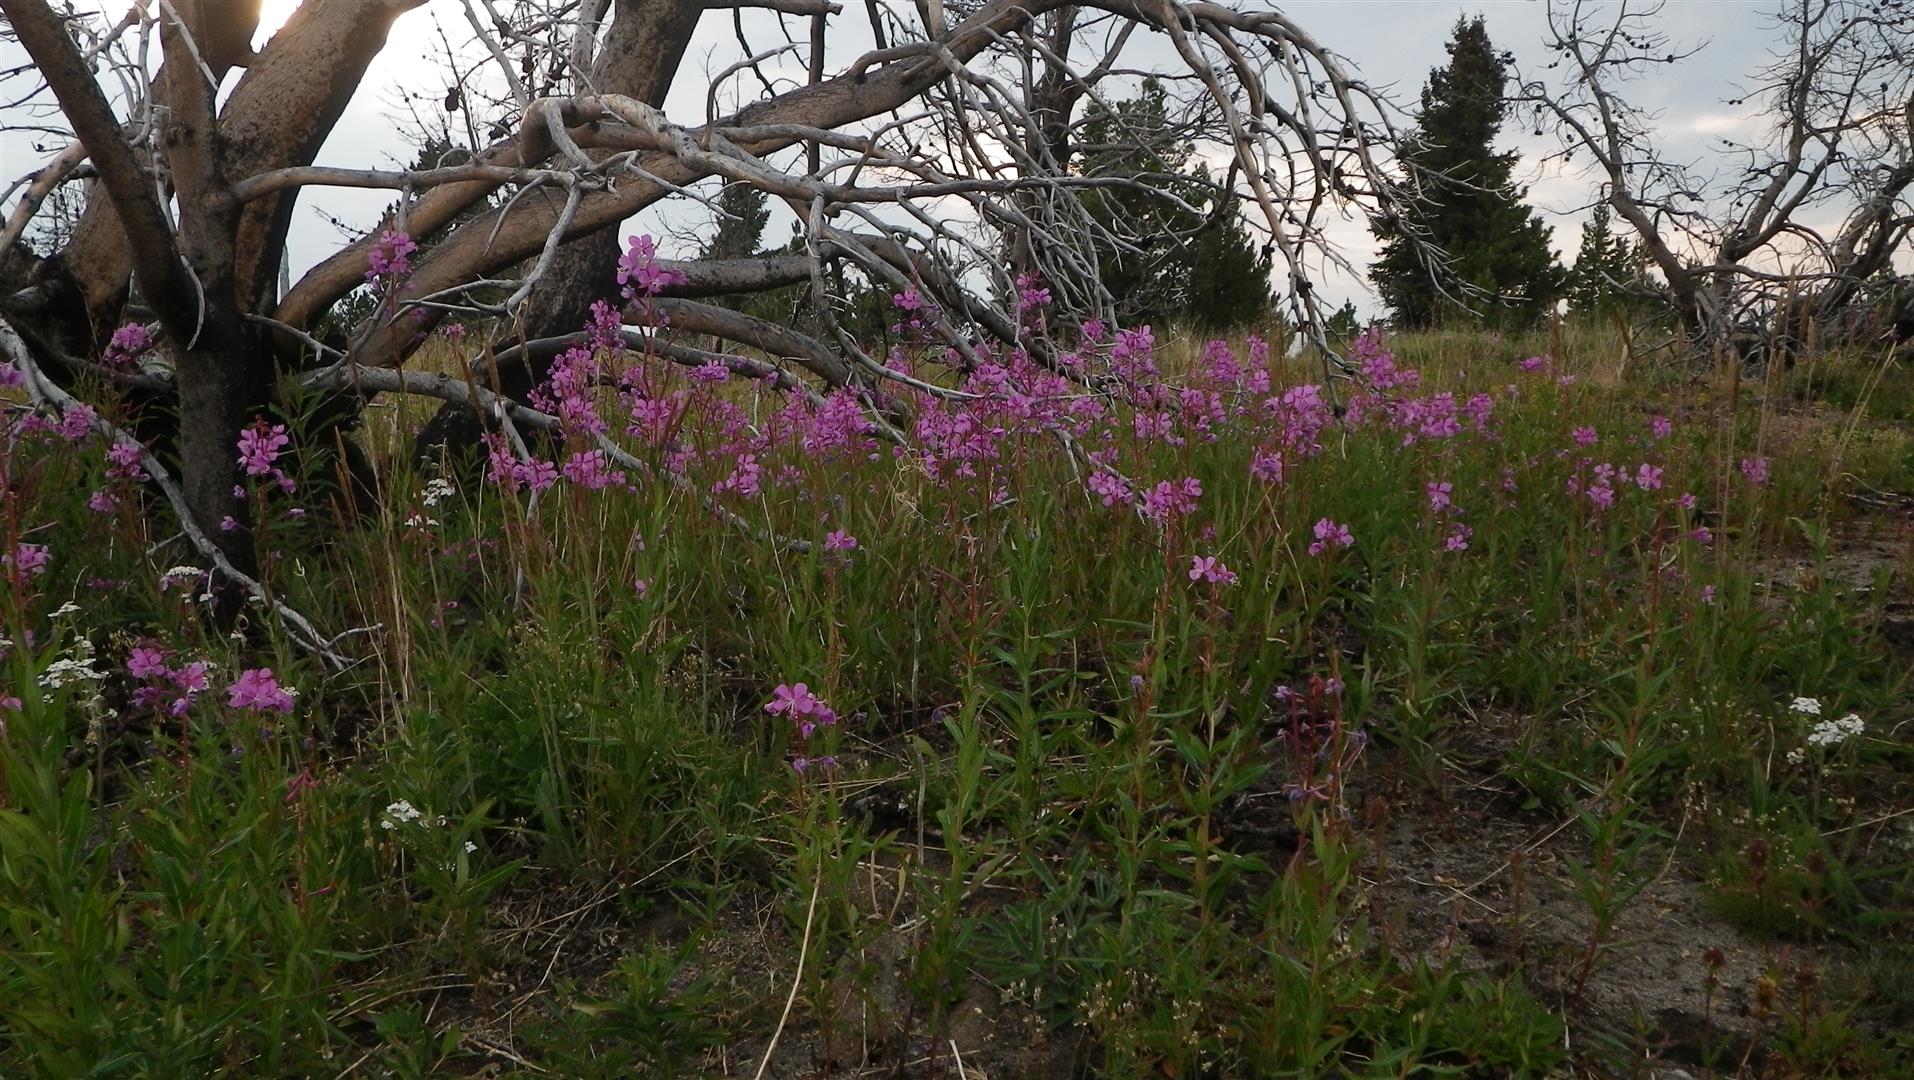 FIRE WEED IN THE BURNT TREES